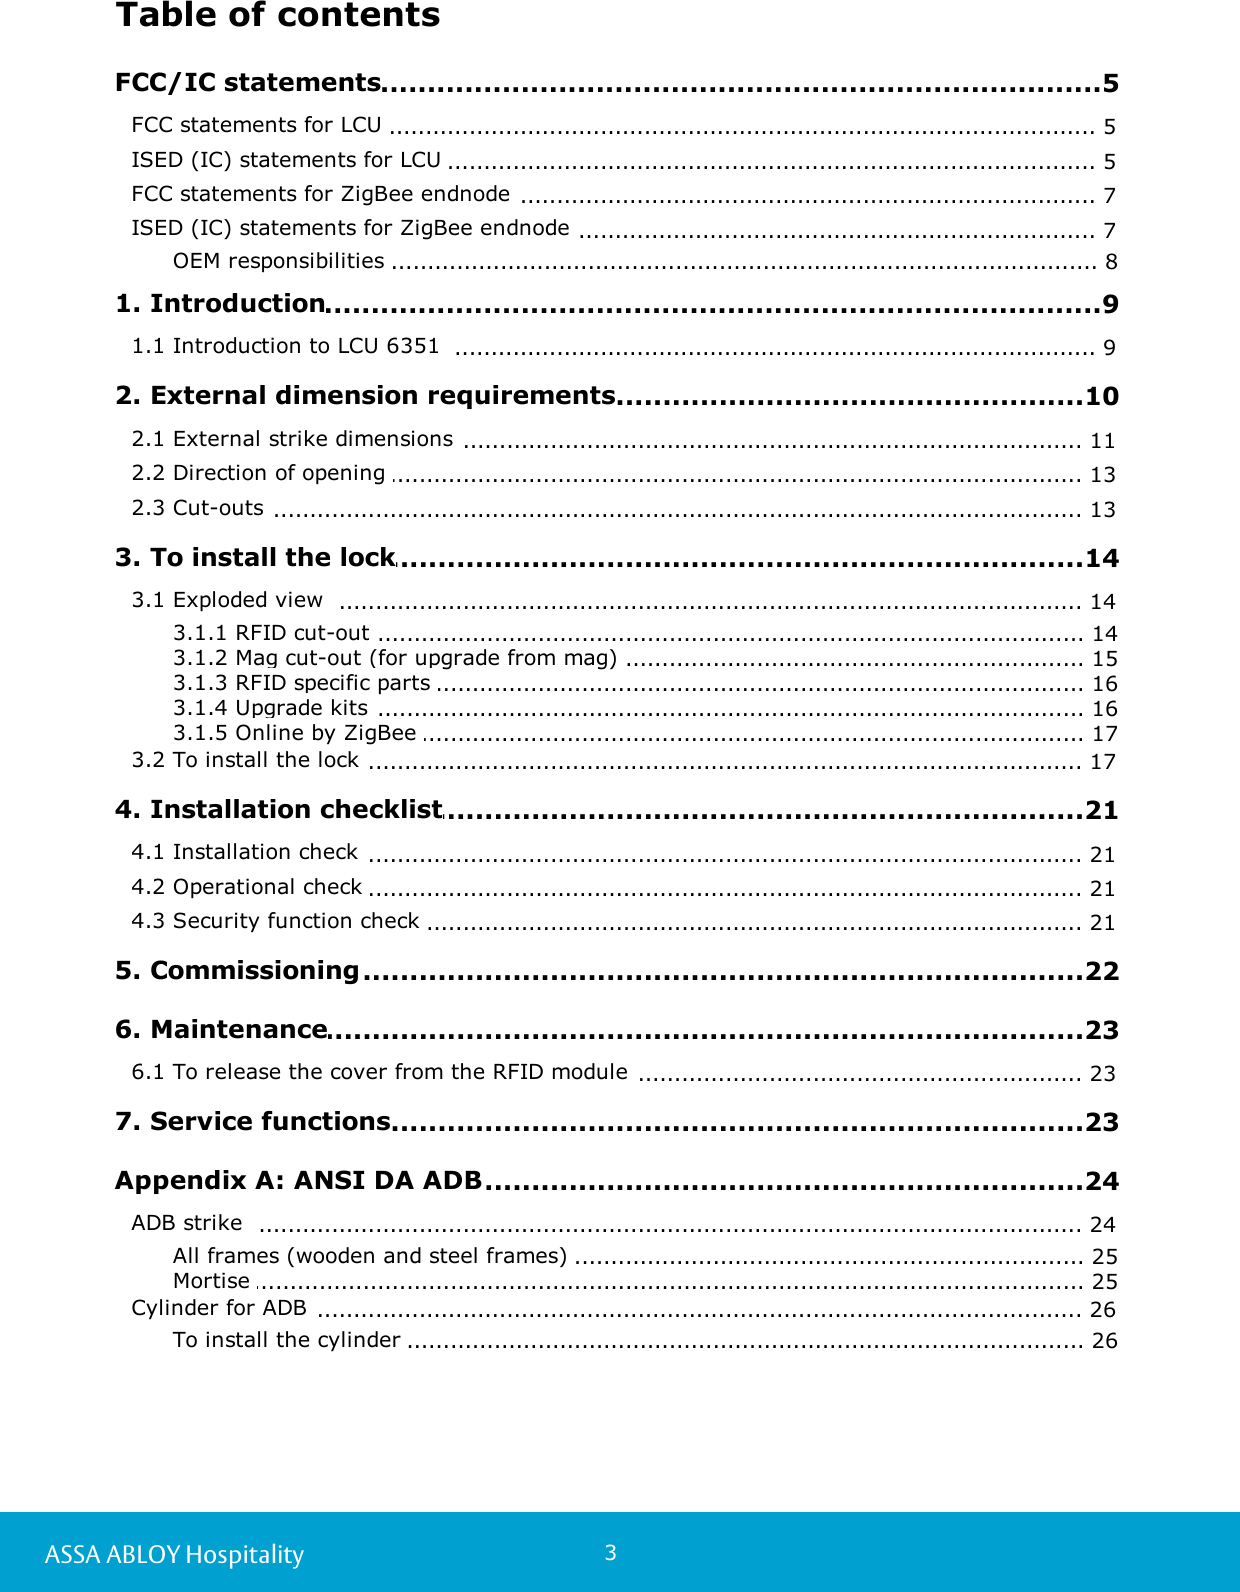 3ASSA ABLOY HospitalityTable of contents.................................................................................................5 FCC/IC statements................................................................................................................. 5FCC statements for LCU ................................................................................................................. 5ISED (IC) statements for LCU ................................................................................................................. 7FCC statements for ZigBee endnode ................................................................................................................. 7ISED (IC) statements for ZigBee endnode ............................................................................................................................. 8OEM responsibilities .................................................................................................9 1. Introduction................................................................................................................. 91.1 Introduction to LCU 6351  .................................................................................................10 2. External dimension requirements................................................................................................................. 112.1 External strike dimensions ................................................................................................................. 132.2 Direction of opening ................................................................................................................. 132.3 Cut-outs .................................................................................................14 3. To install the lock................................................................................................................. 143.1 Exploded view  ............................................................................................................................. 143.1.1 RFID cut-out ............................................................................................................................. 153.1.2 Mag cut-out (for upgrade from mag) ............................................................................................................................. 163.1.3 RFID specific parts ............................................................................................................................. 163.1.4 Upgrade kits ............................................................................................................................. 173.1.5 Online by ZigBee ................................................................................................................. 173.2 To install the lock .................................................................................................21 4. Installation checklist................................................................................................................. 214.1 Installation check ................................................................................................................. 214.2 Operational check ................................................................................................................. 214.3 Security function check .................................................................................................22 5. Commissioning.................................................................................................23 6. Maintenance................................................................................................................. 236.1 To release the cover from the RFID module .................................................................................................23 7. Service functions.................................................................................................24 Appendix A: ANSI DA ADB................................................................................................................. 24ADB strike ............................................................................................................................. 25All frames (wooden and steel frames) ............................................................................................................................. 25Mortise ................................................................................................................. 26Cylinder for ADB ............................................................................................................................. 26To install the cylinder 